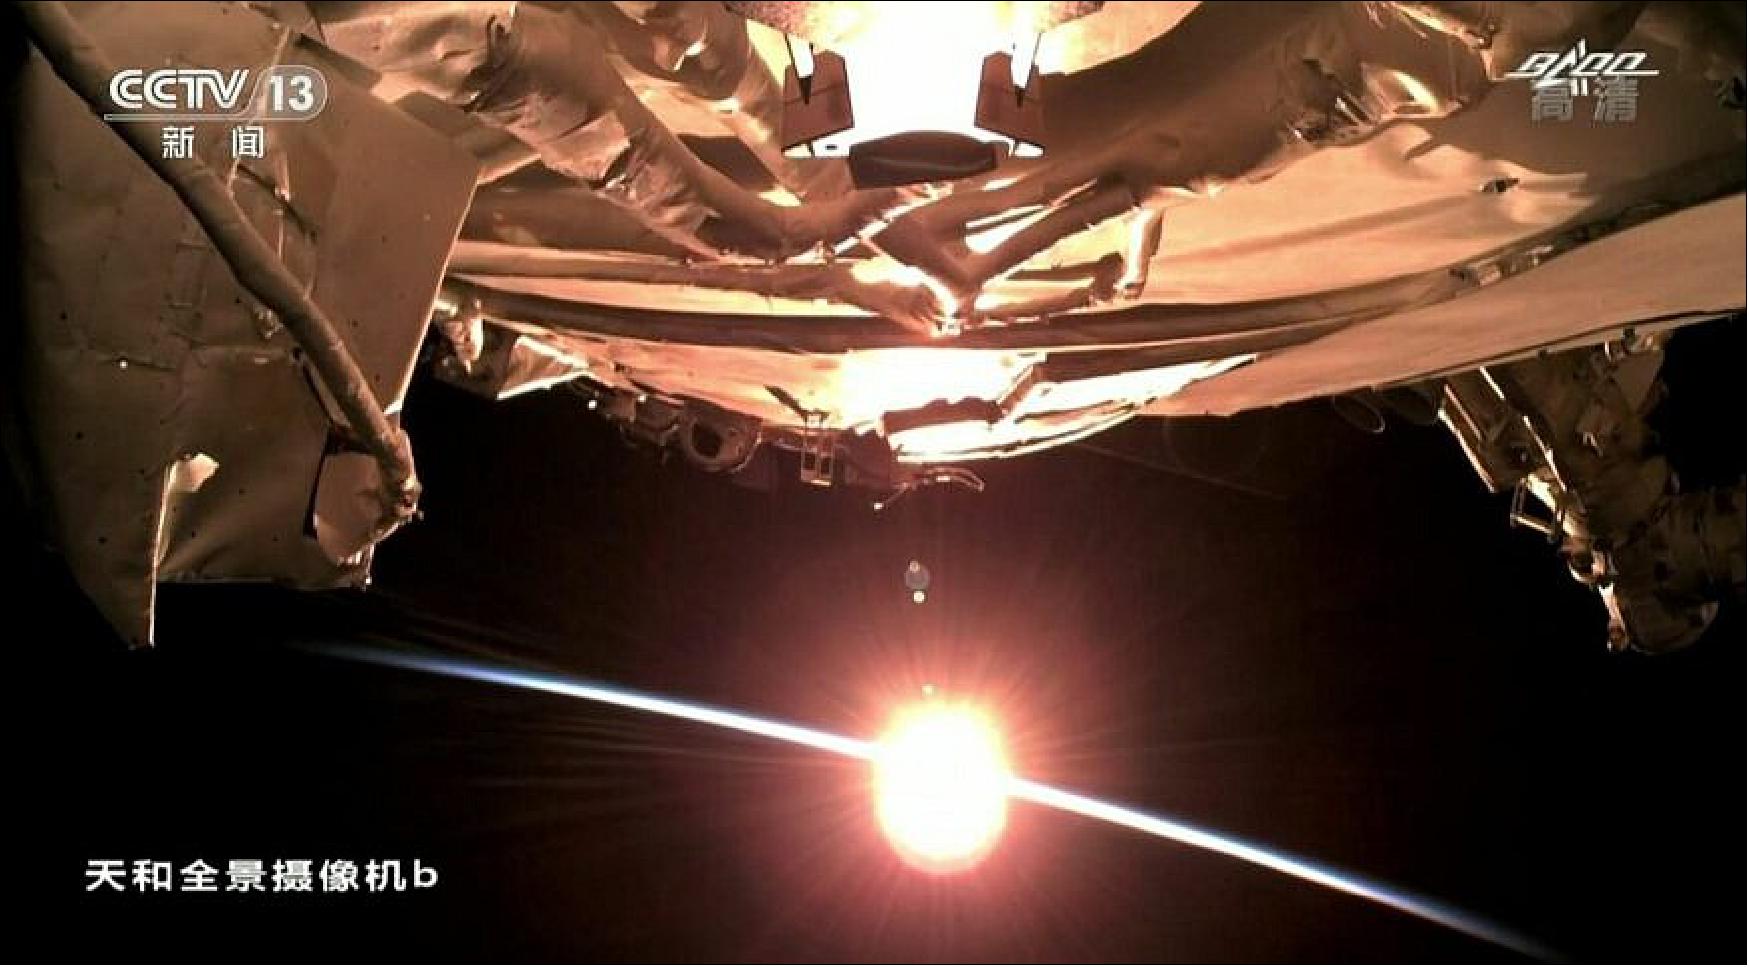 Figure 23: A view of the Sun on the horizon from Tianhe ahead of the Shenzhou-12 docking (image credit: BACC/CCTV/screenshot)